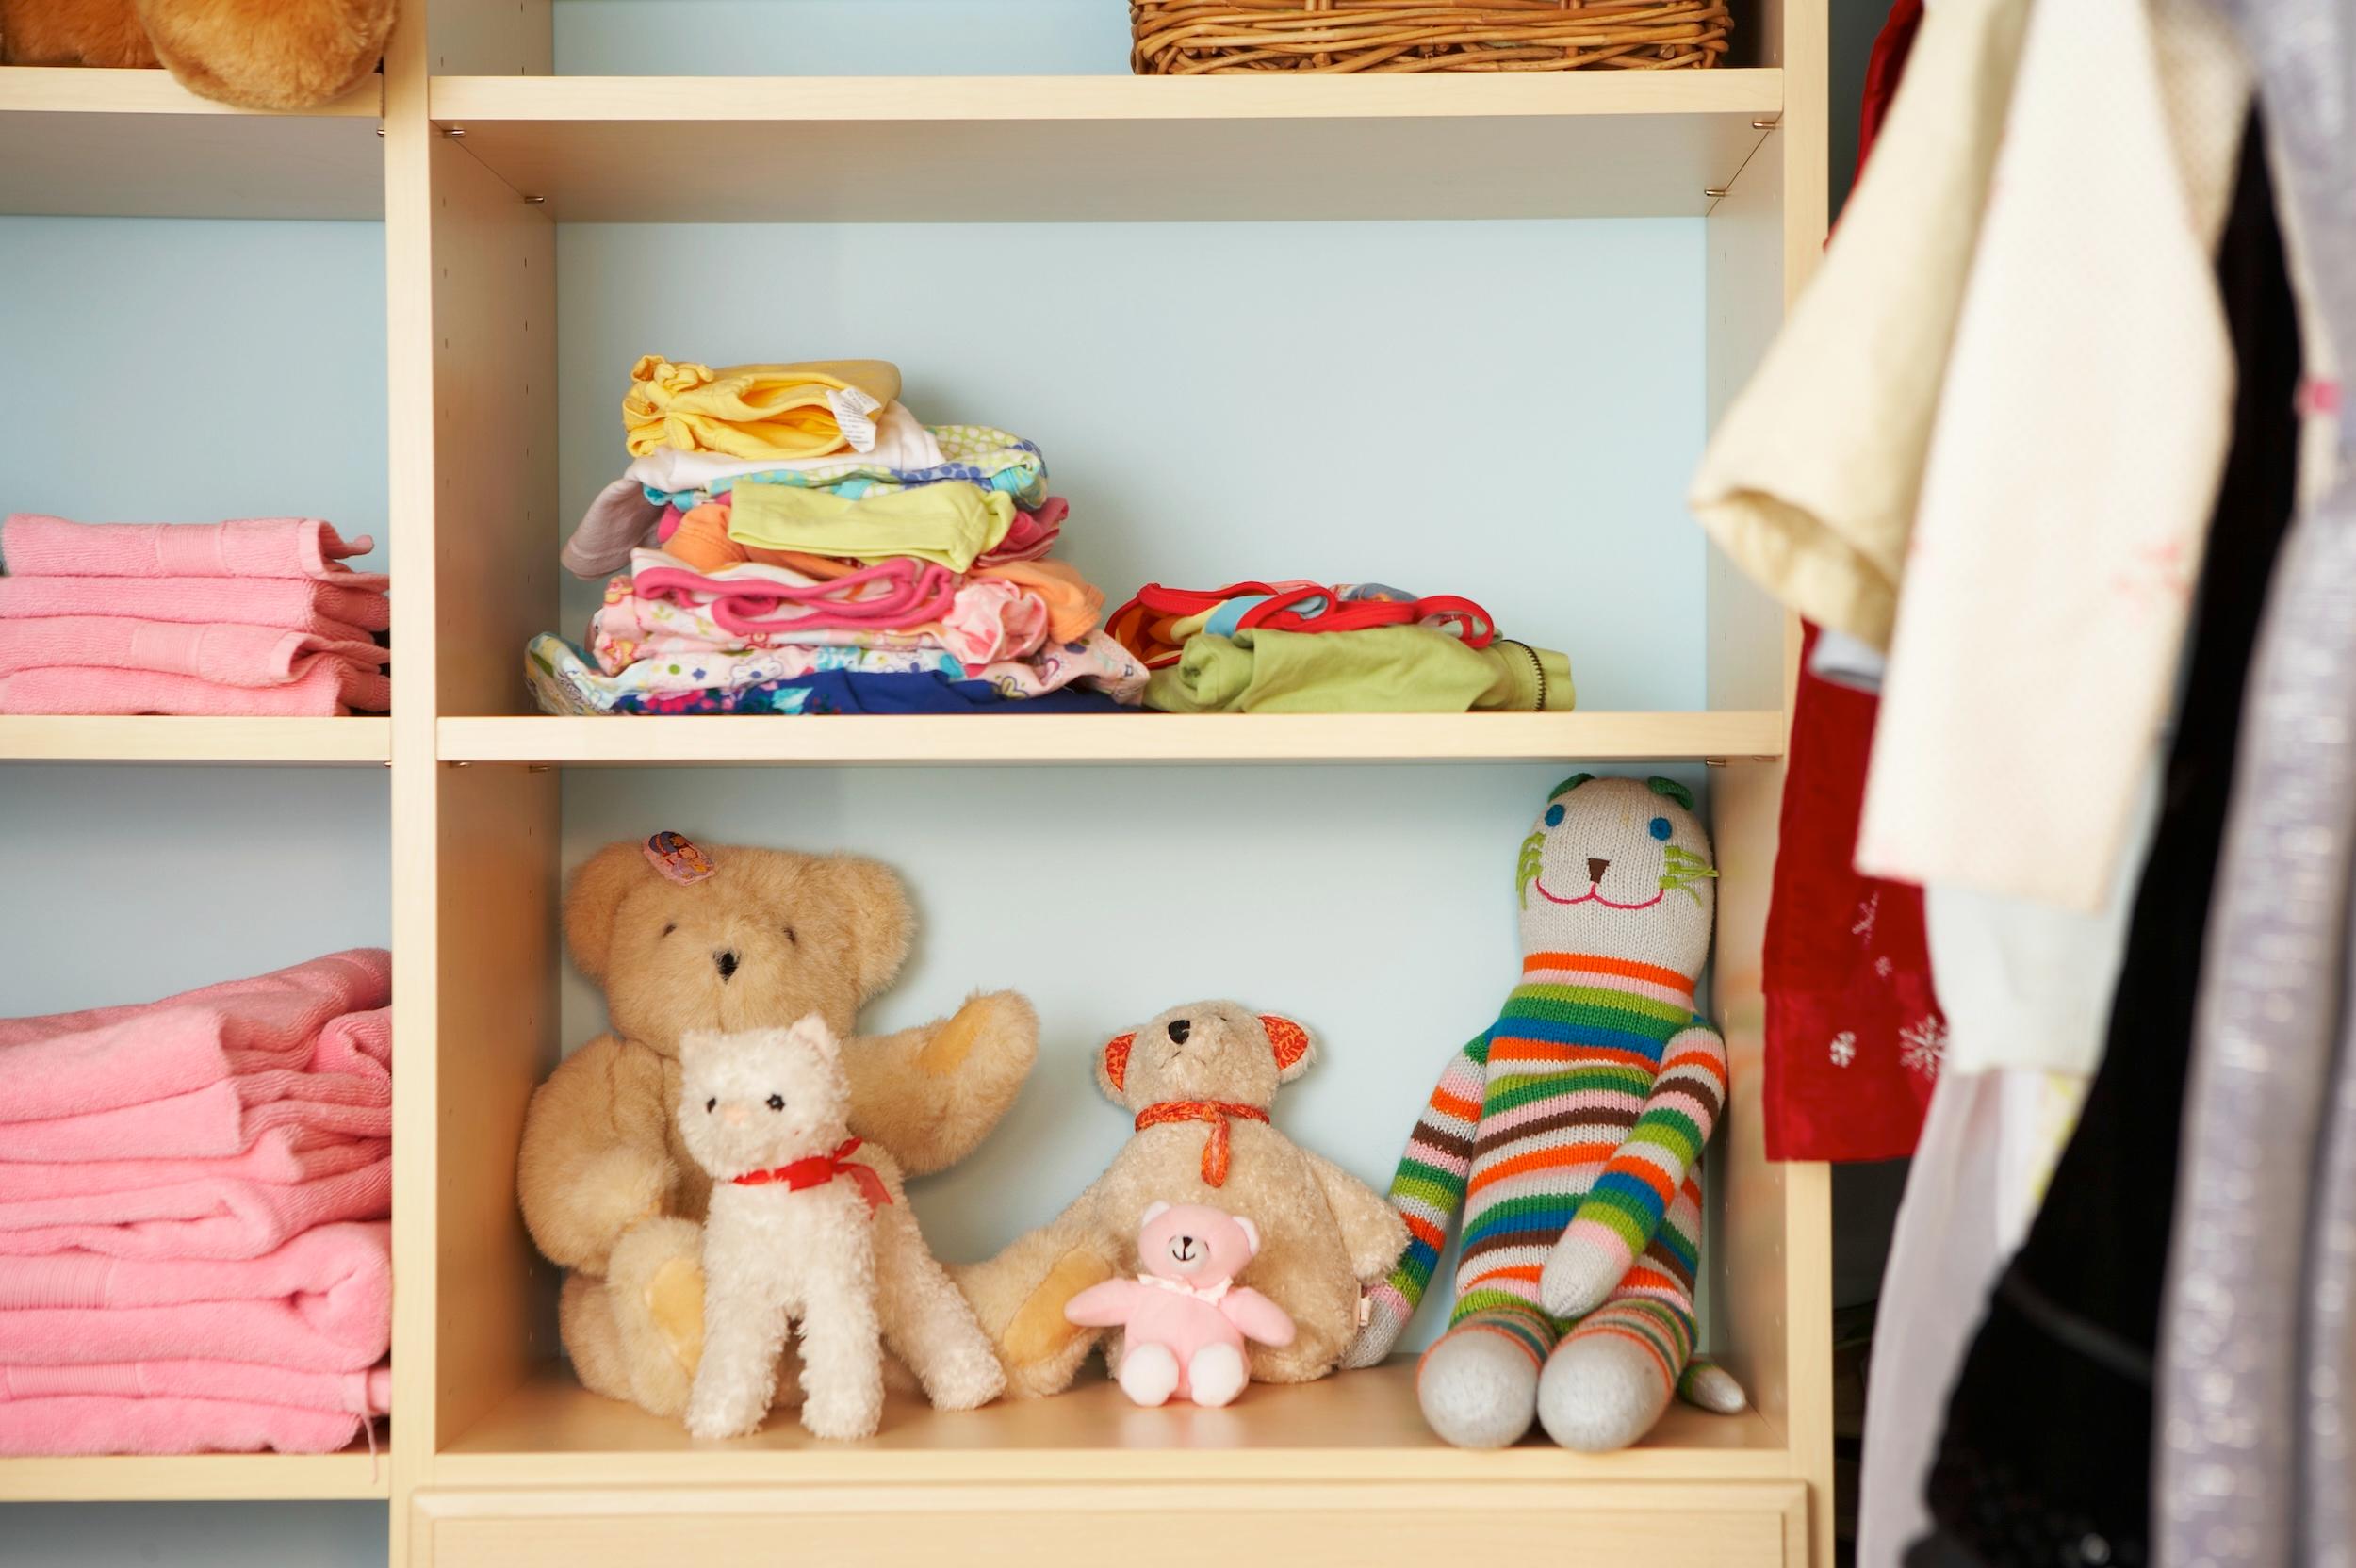 Stuffed animals, clothing, and towels on shelves in a nursery closet